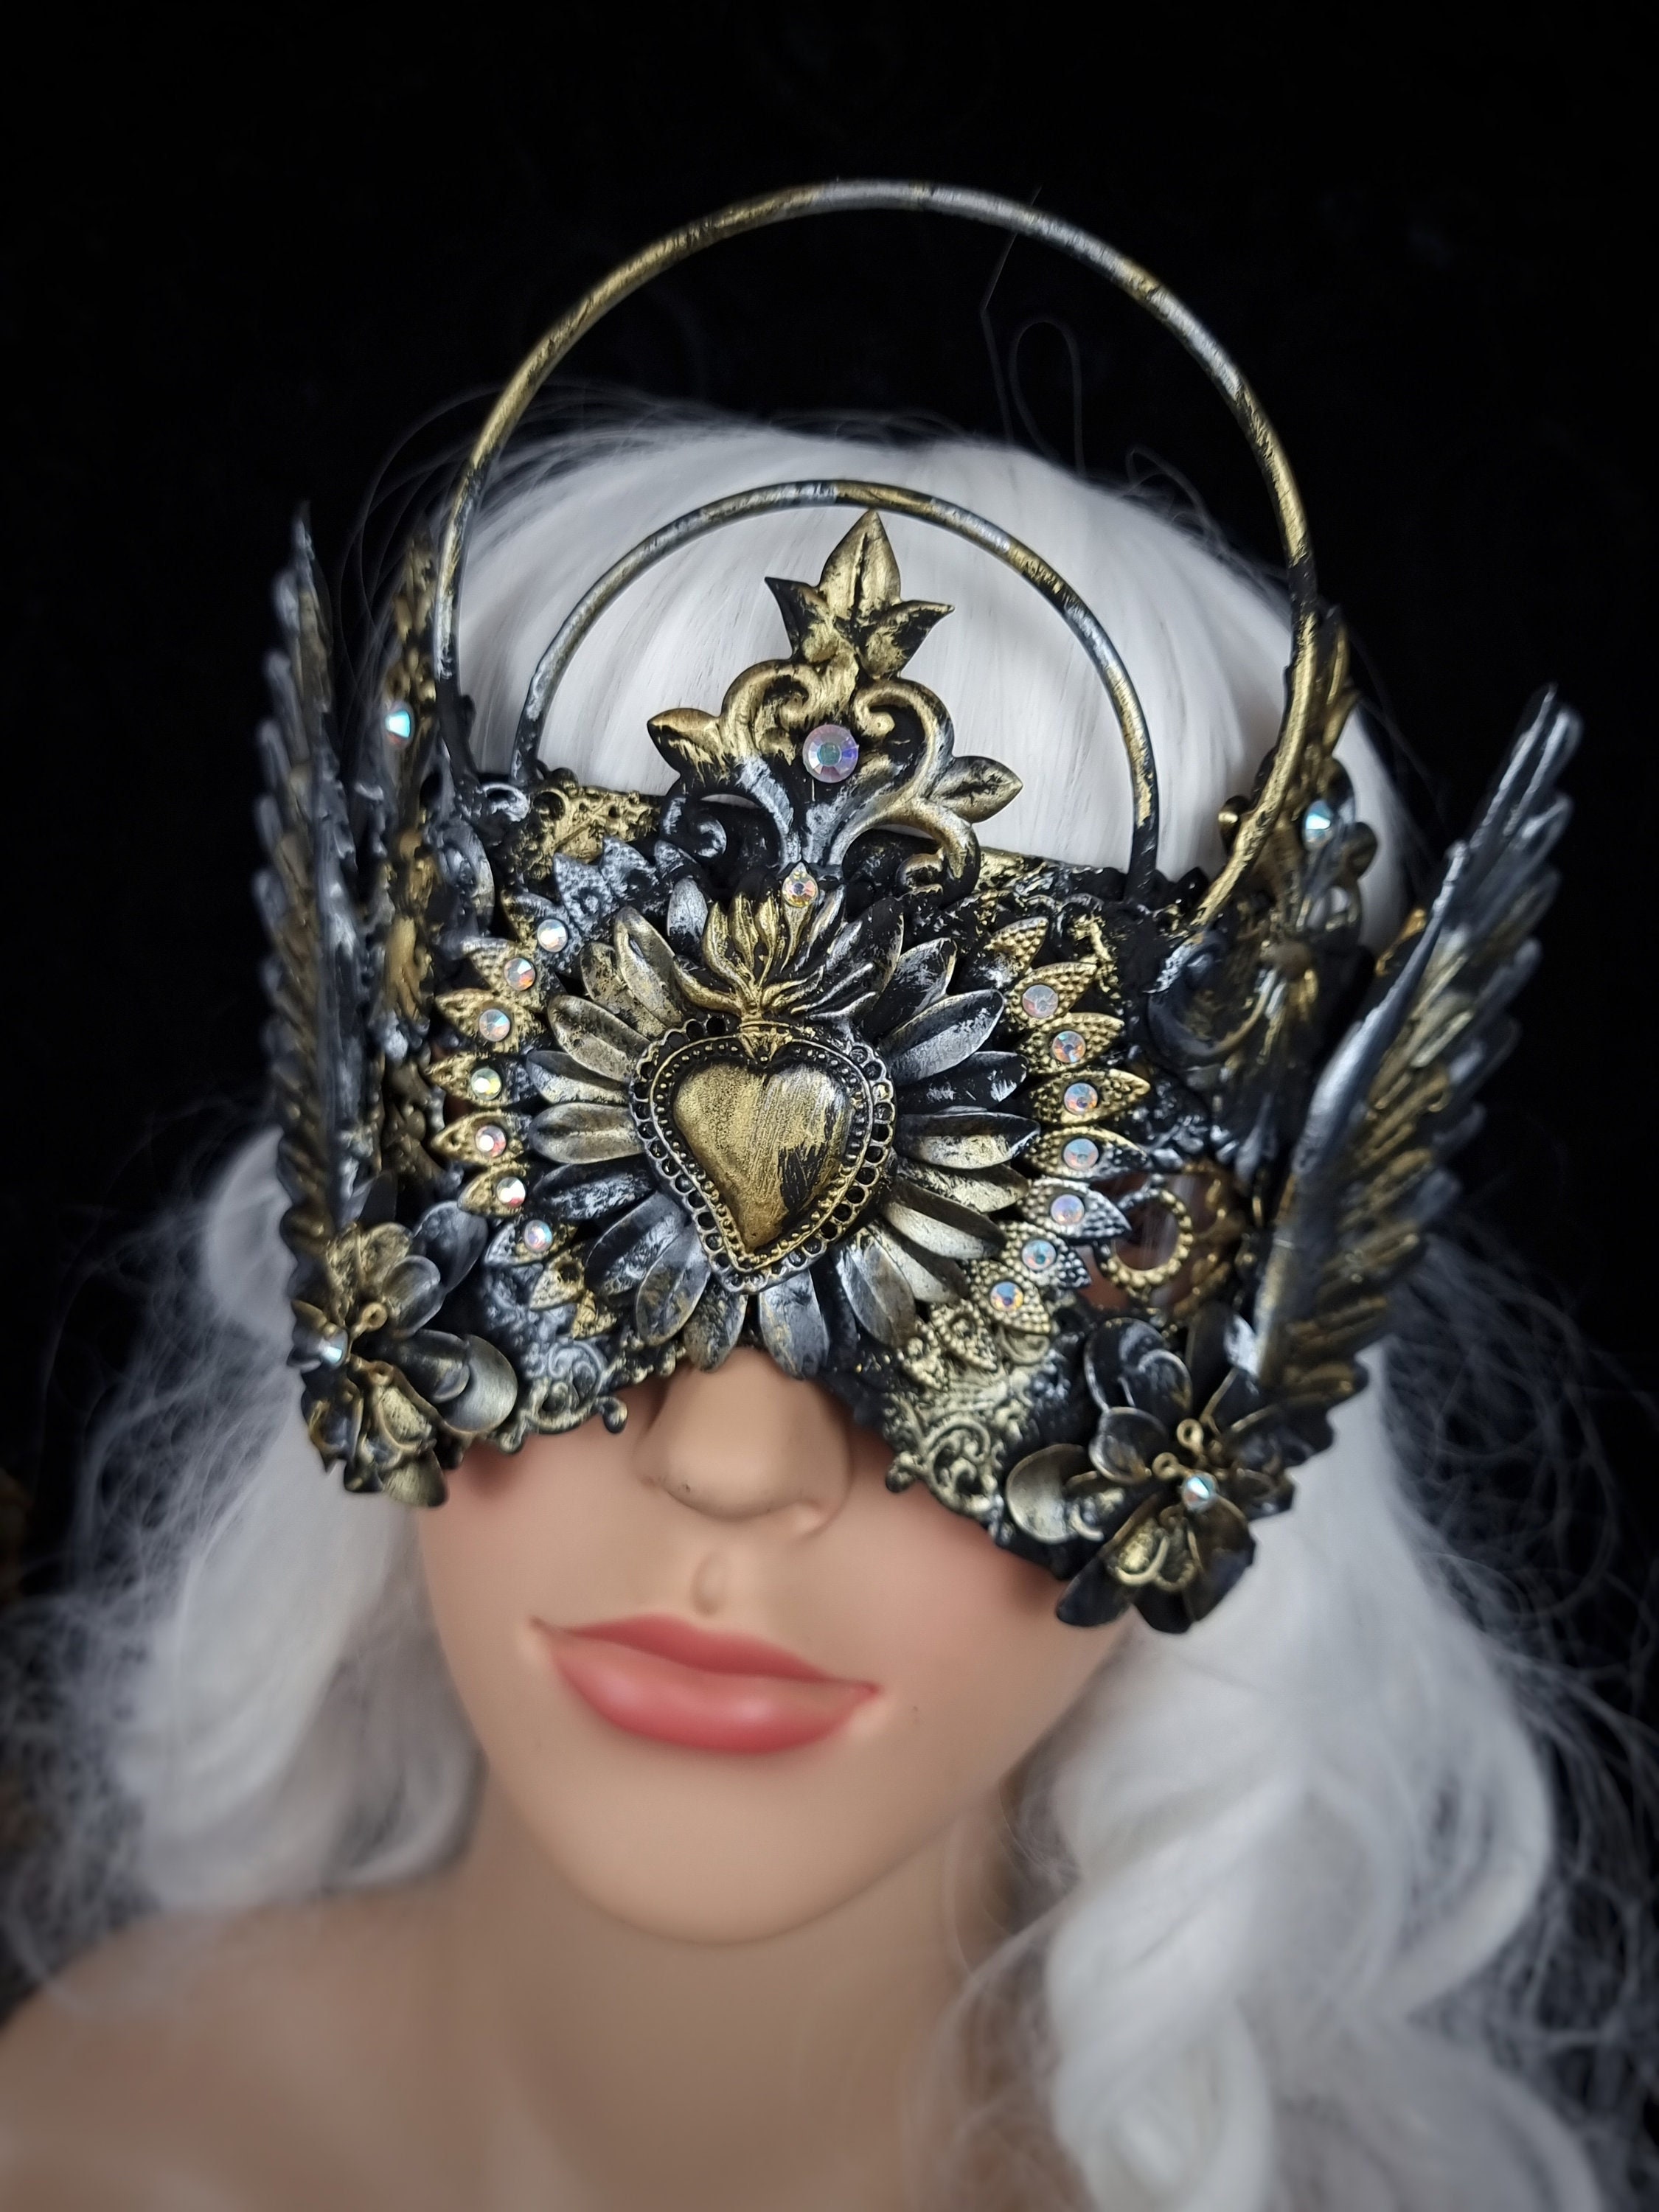 Halo Blind mask Eve goth crown, larp, gothic headpiece, medusa costume,  fantasy, cosplay, viking, cathedral / Made to order